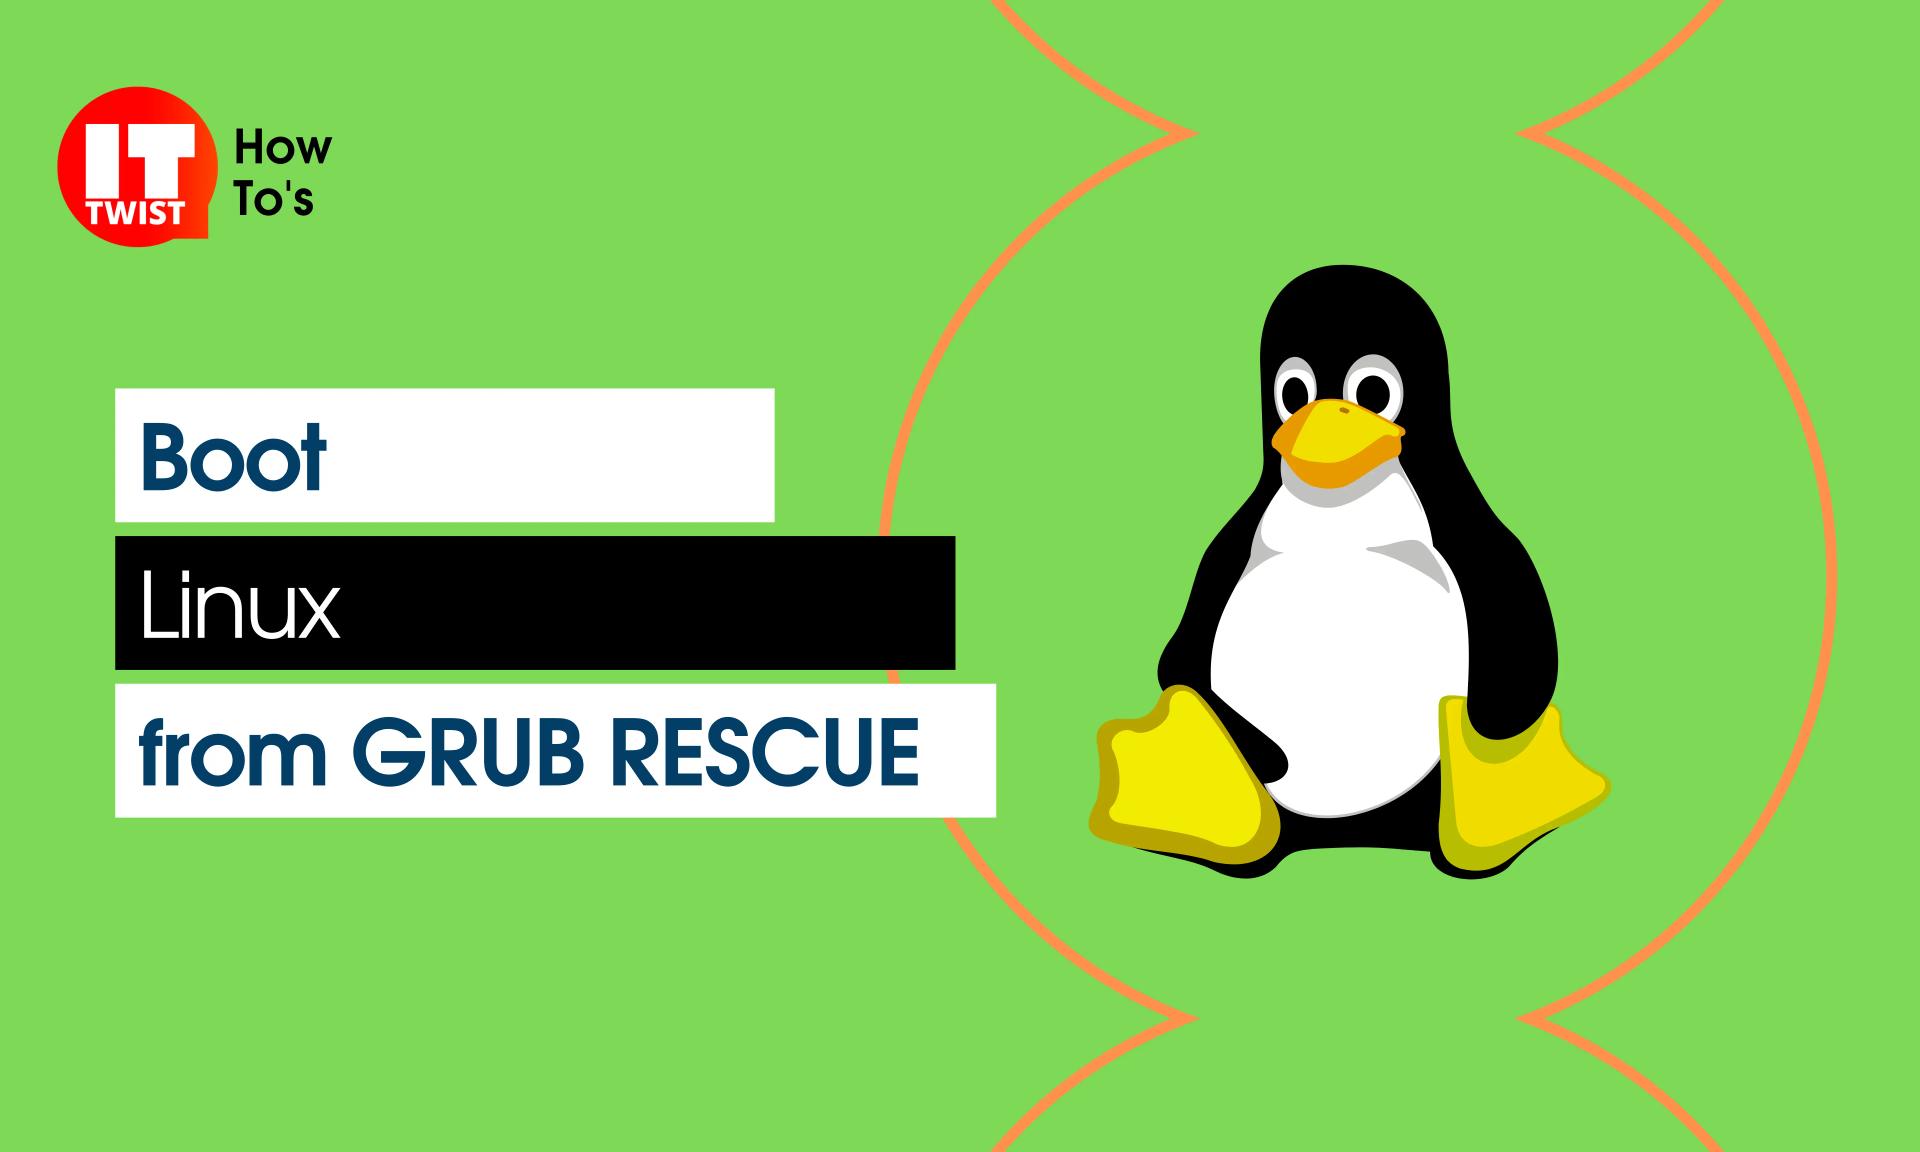 How to boot Linux from grub rescue?